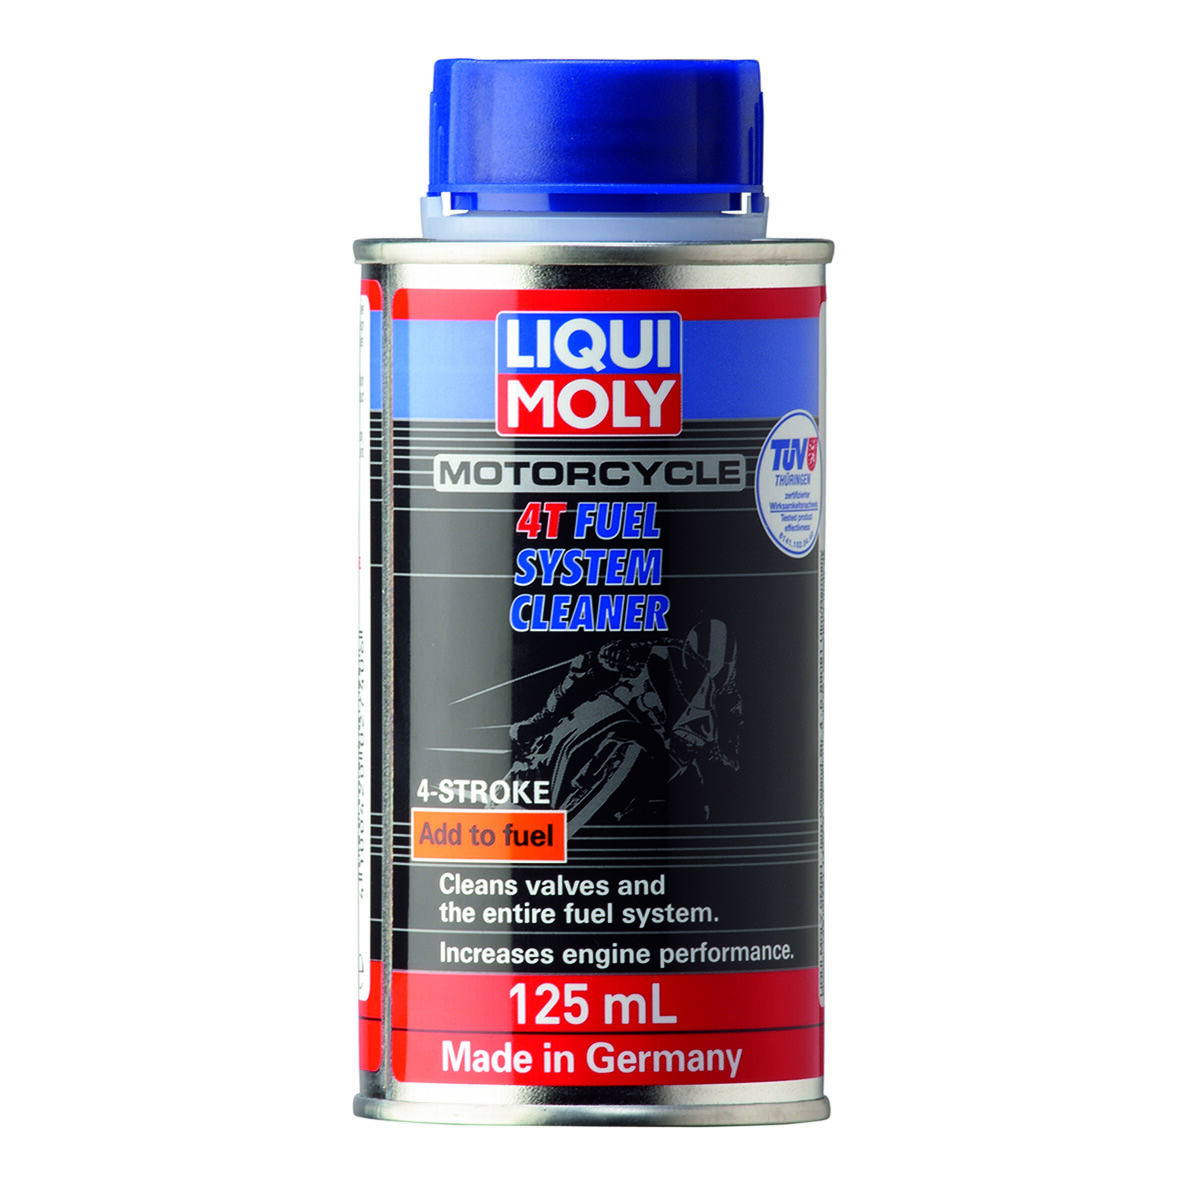 Liqui Moly Sri Lanka - Our Intake System Cleaner Diesel guarantees the  functional performance of the moving parts and reduces fuel consumption.  Increases the reliability of diesel-powered engines.